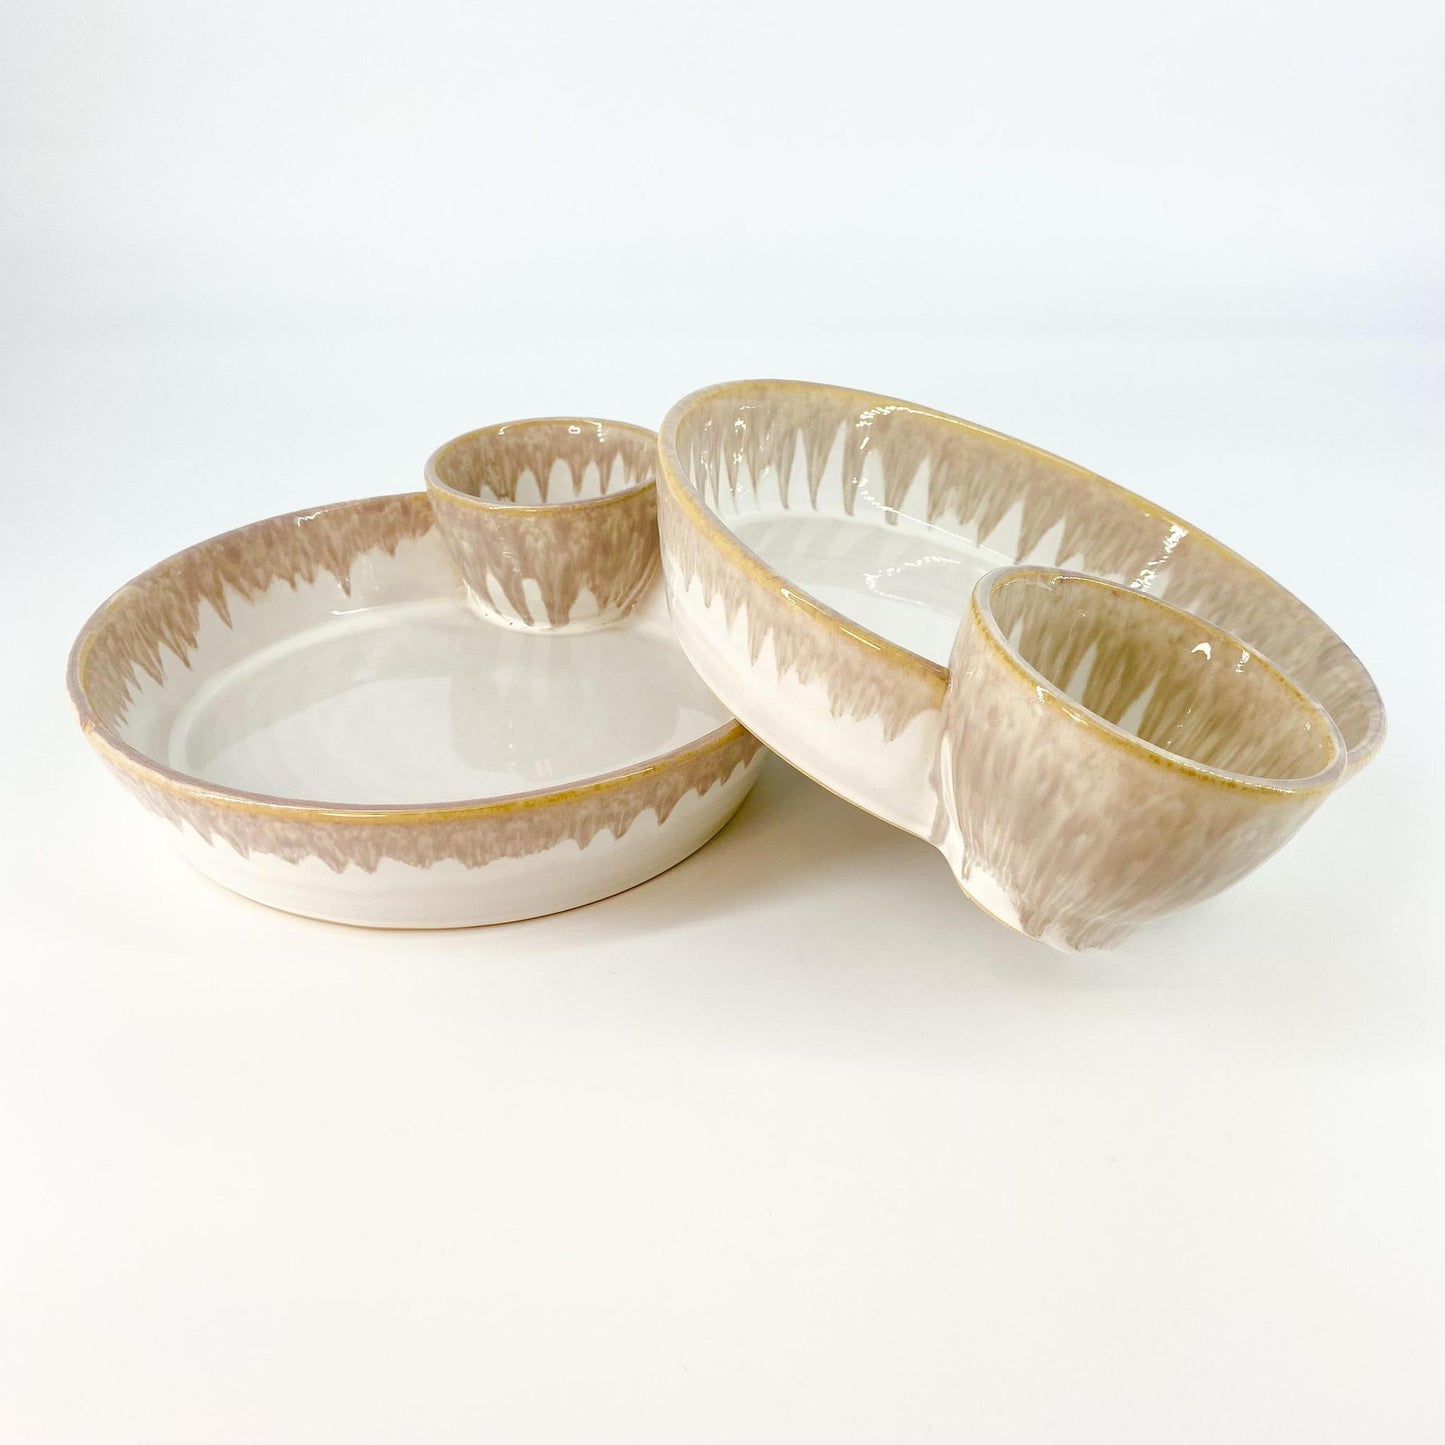 Serving Piece - Chip & Dip - Two Attached Bowls - glazed ceramic